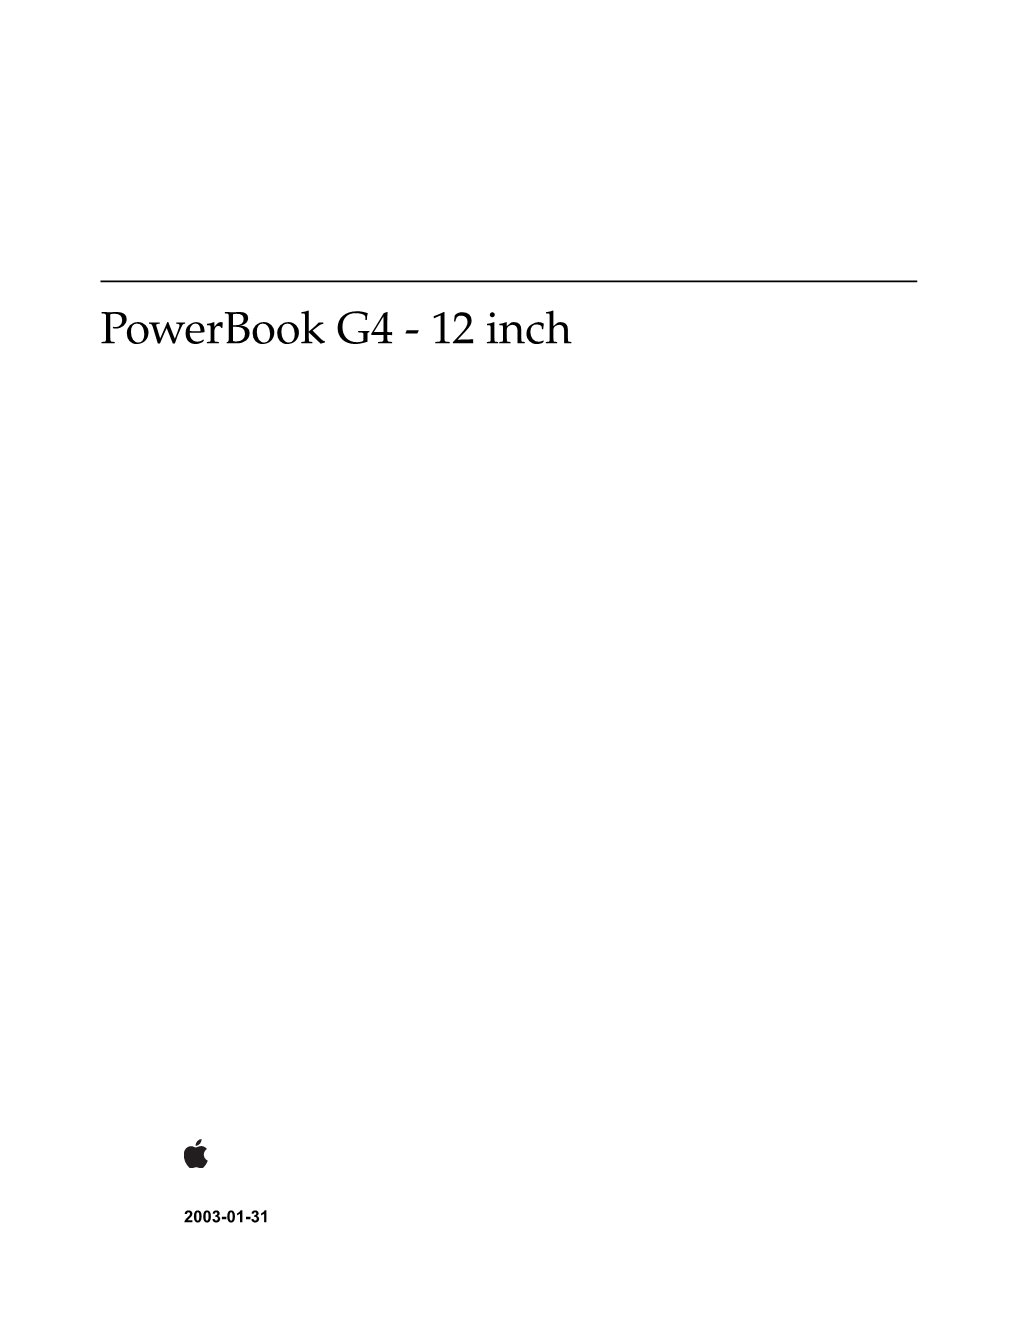 Developer Note Gives a Technical Description of the New Powerbook G4 –12 Inch Computer